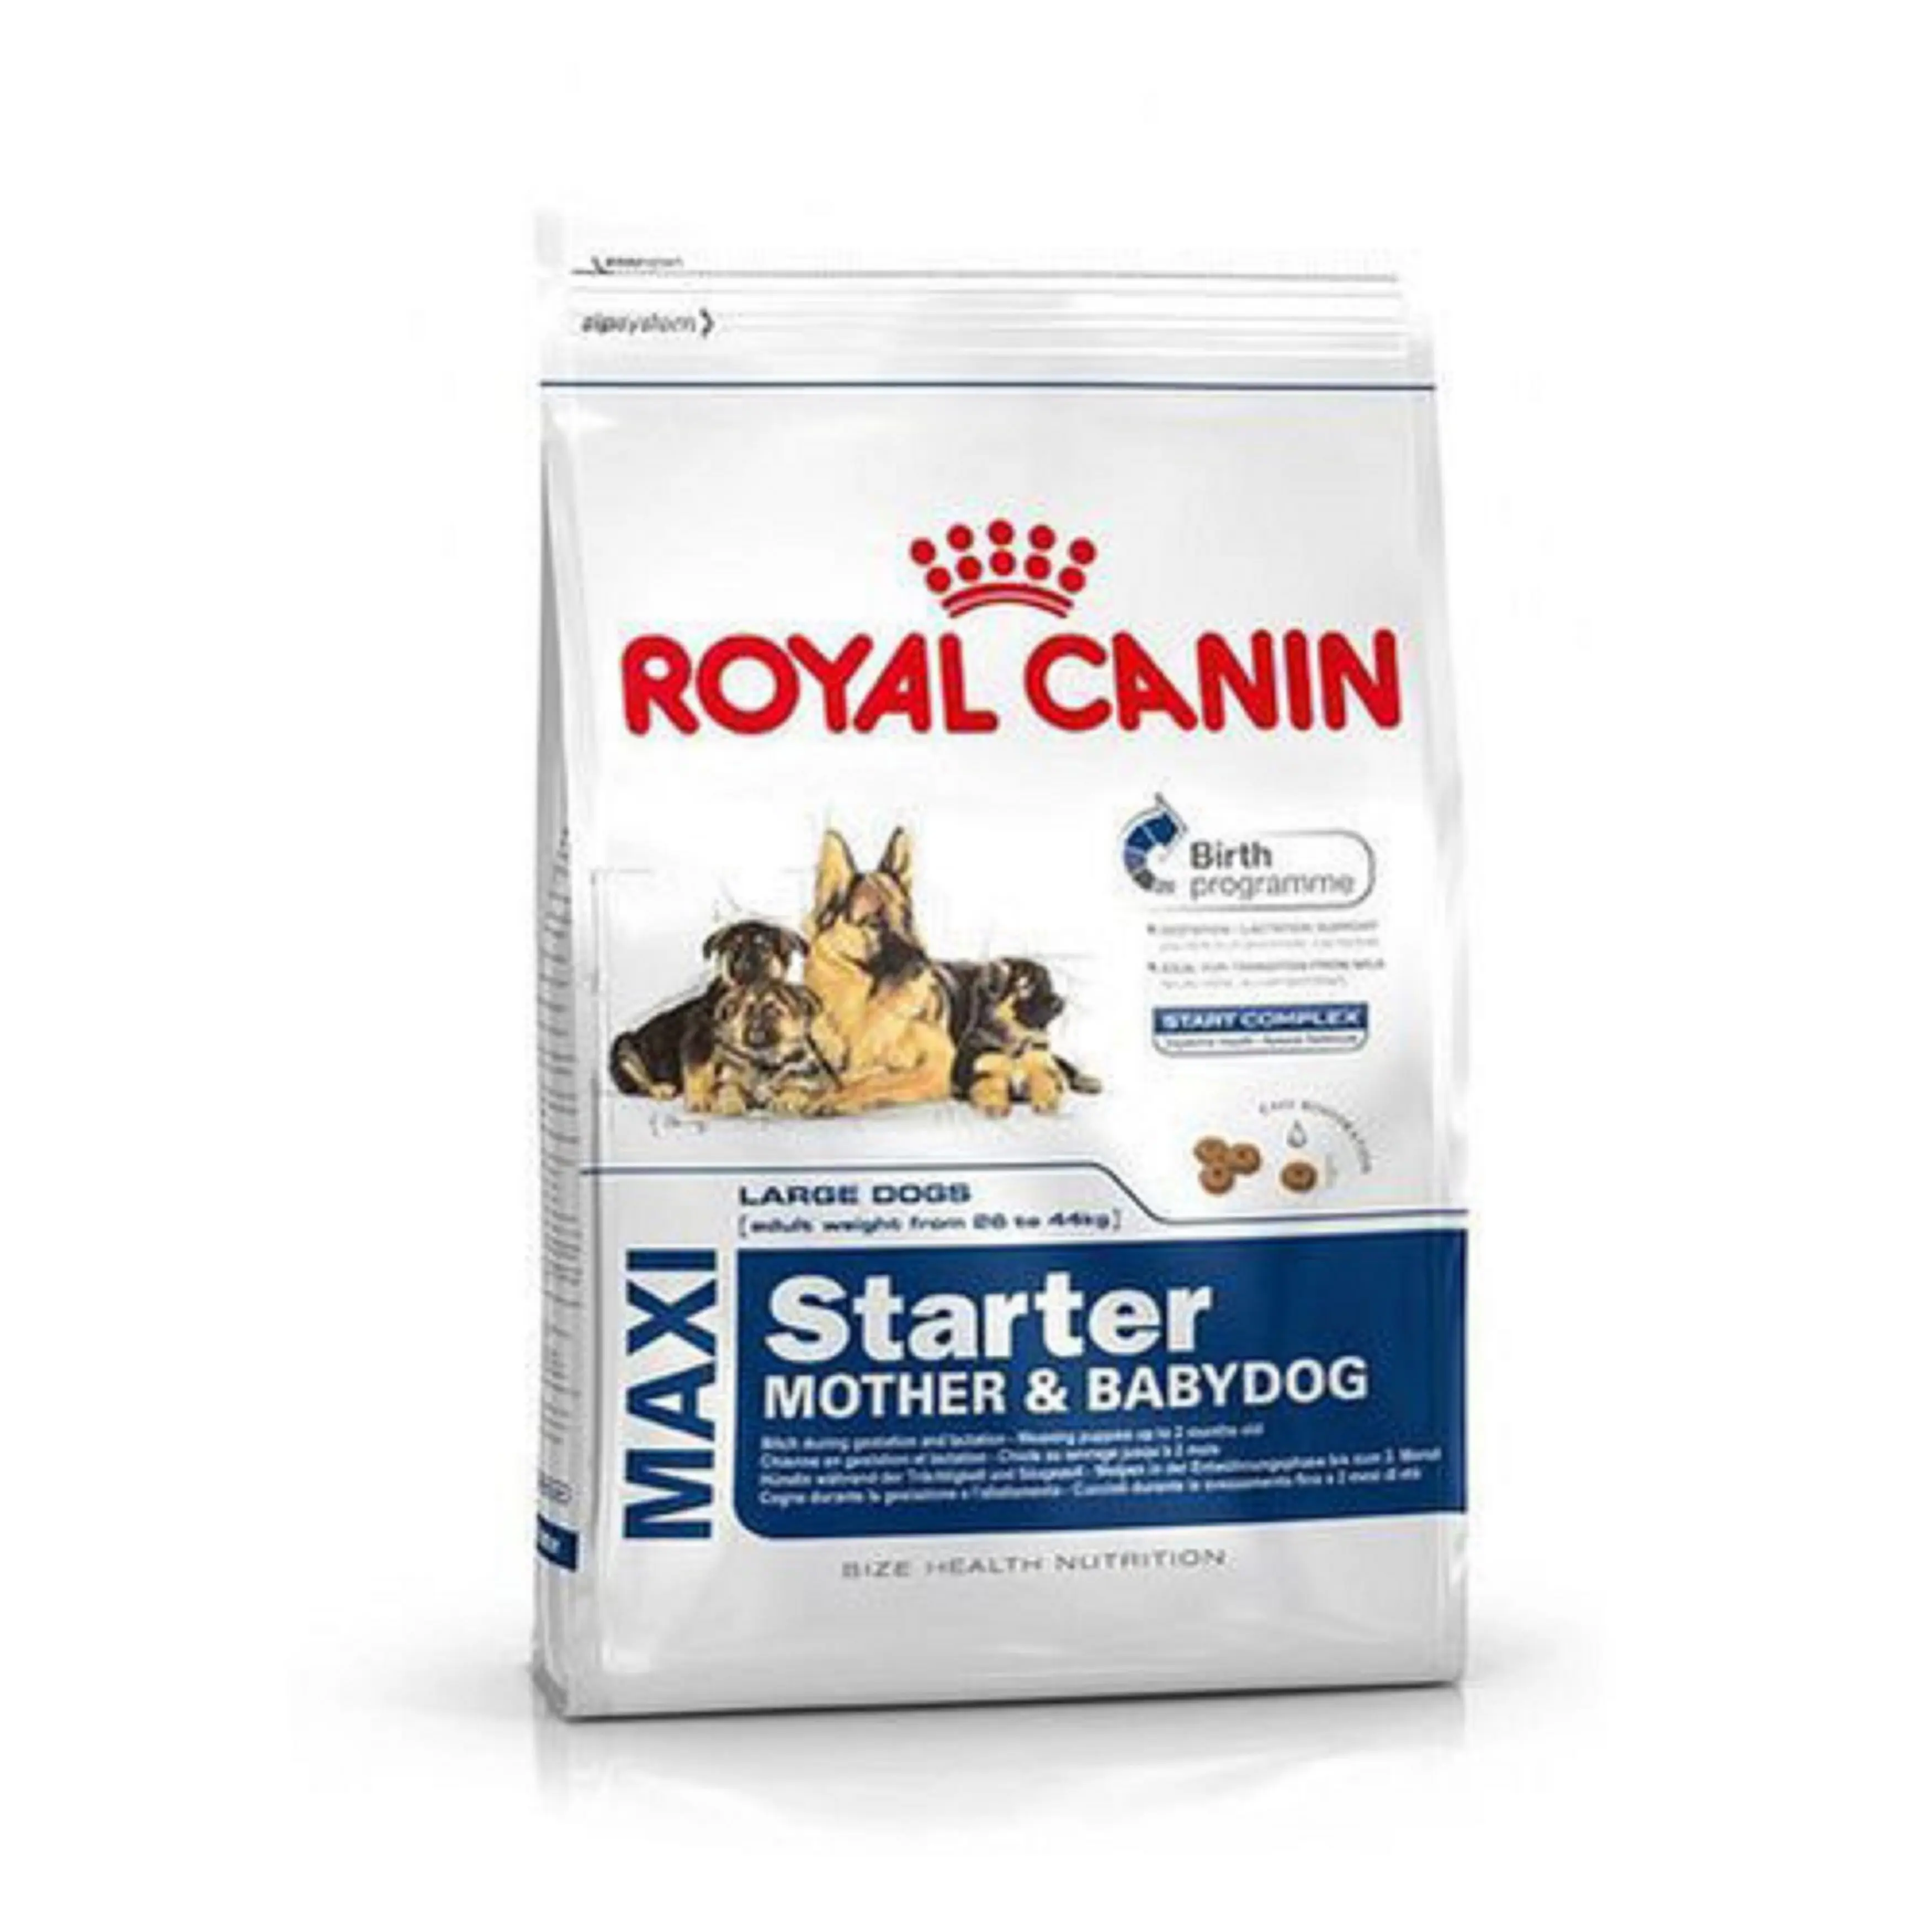 Royal Canin Persian 30 Dry Cats Food / Royal Canin Mini Adult Dry Dogs Food